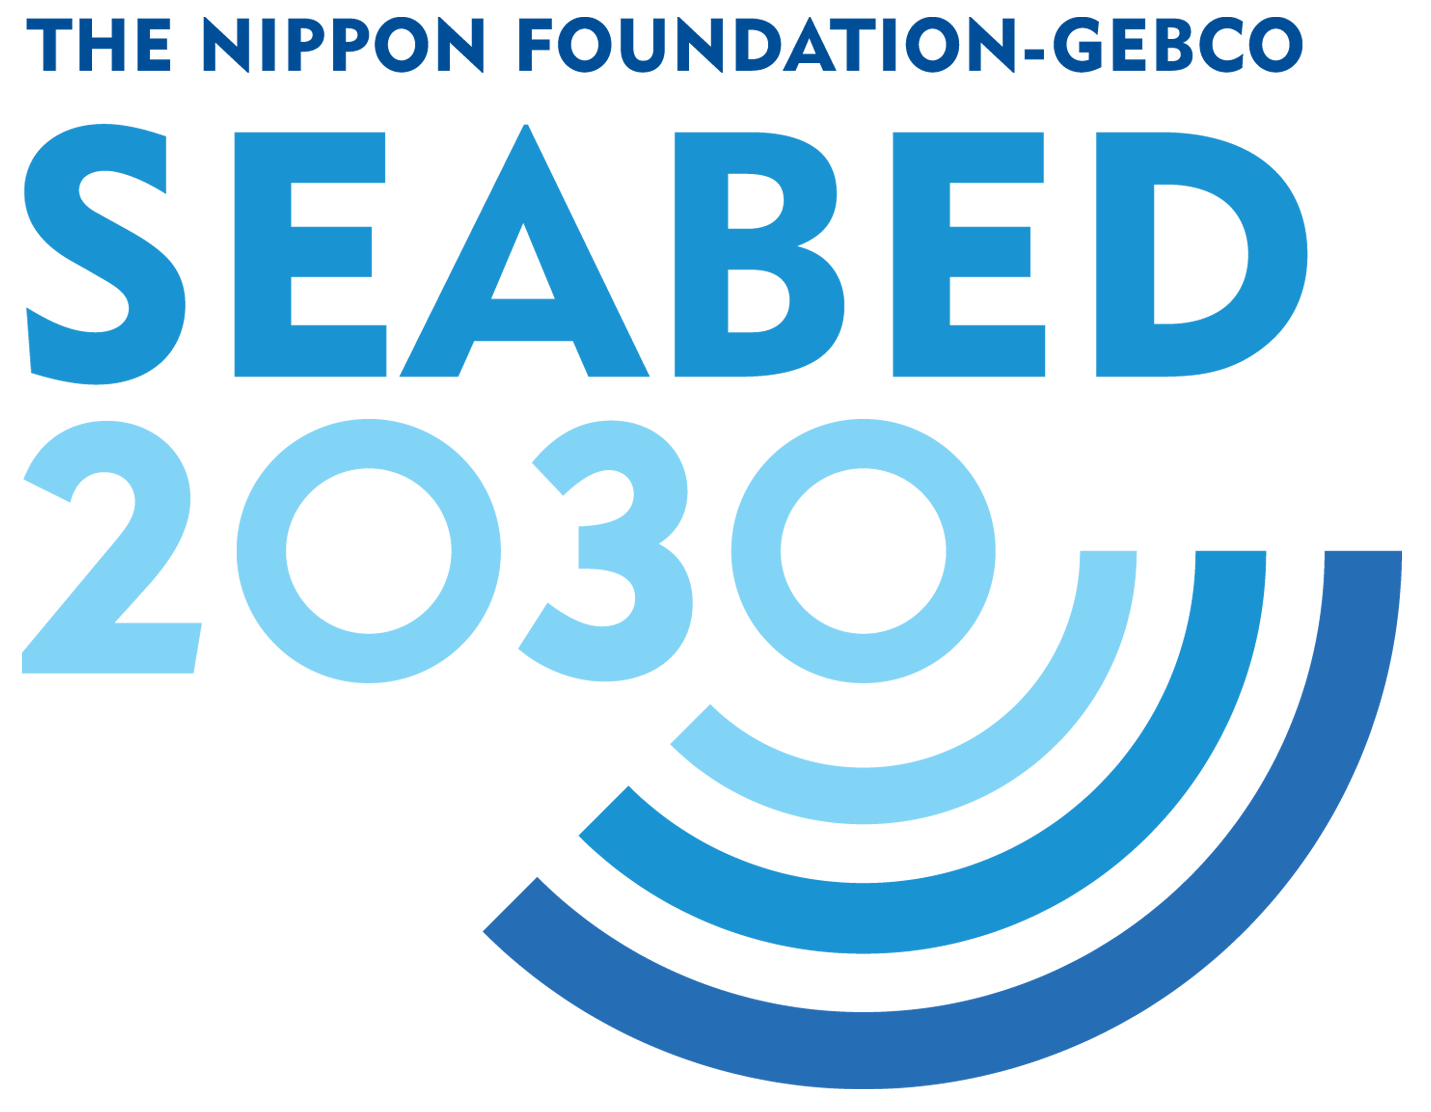 Seabed 2030